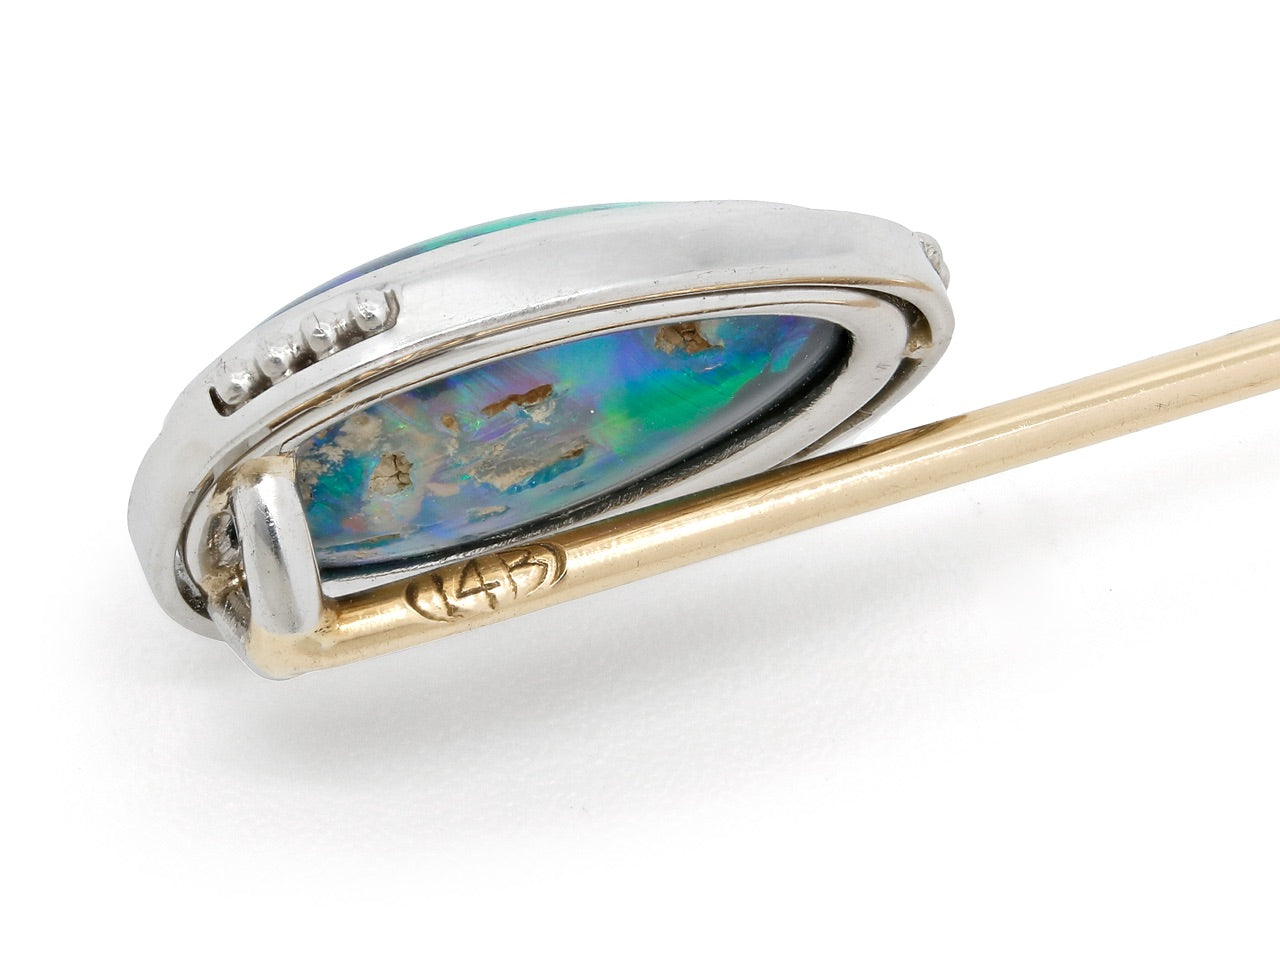 Black Opal Stick Pin in Platinum and 14K Gold